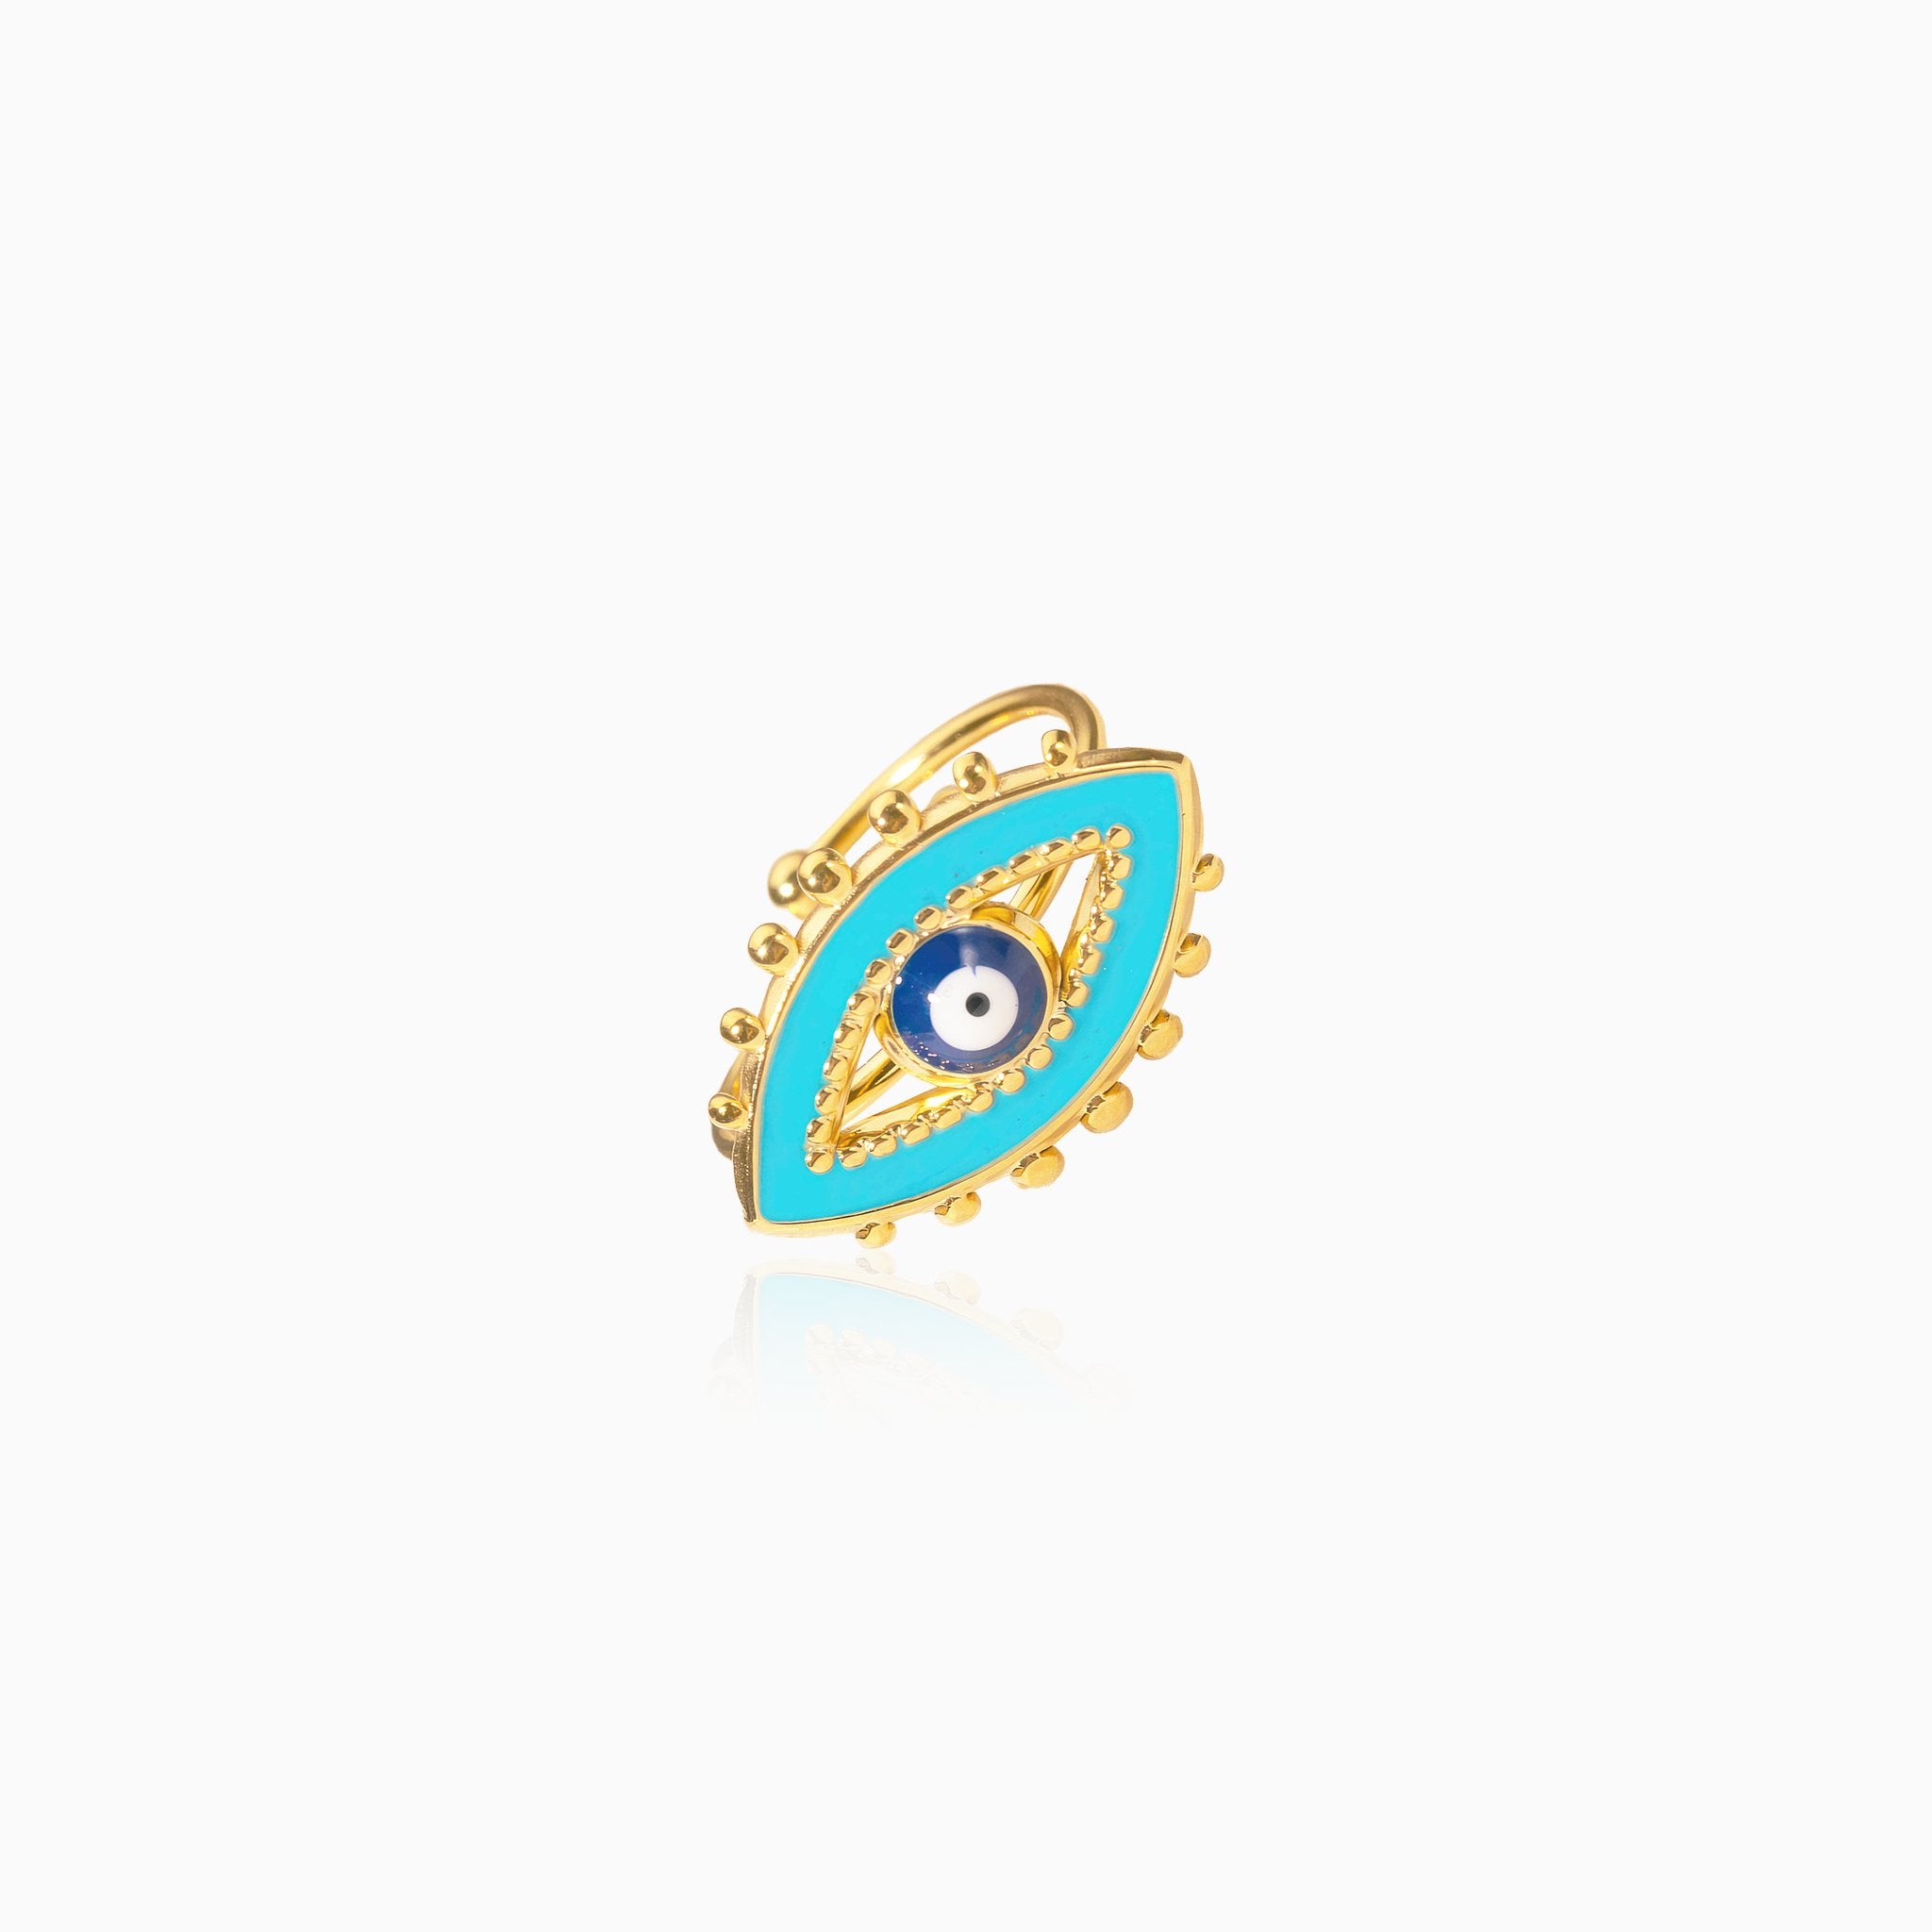 Blue Devil Eye Design Ring - Nobbier - Ring - 18K Gold And Titanium PVD Coated Jewelry